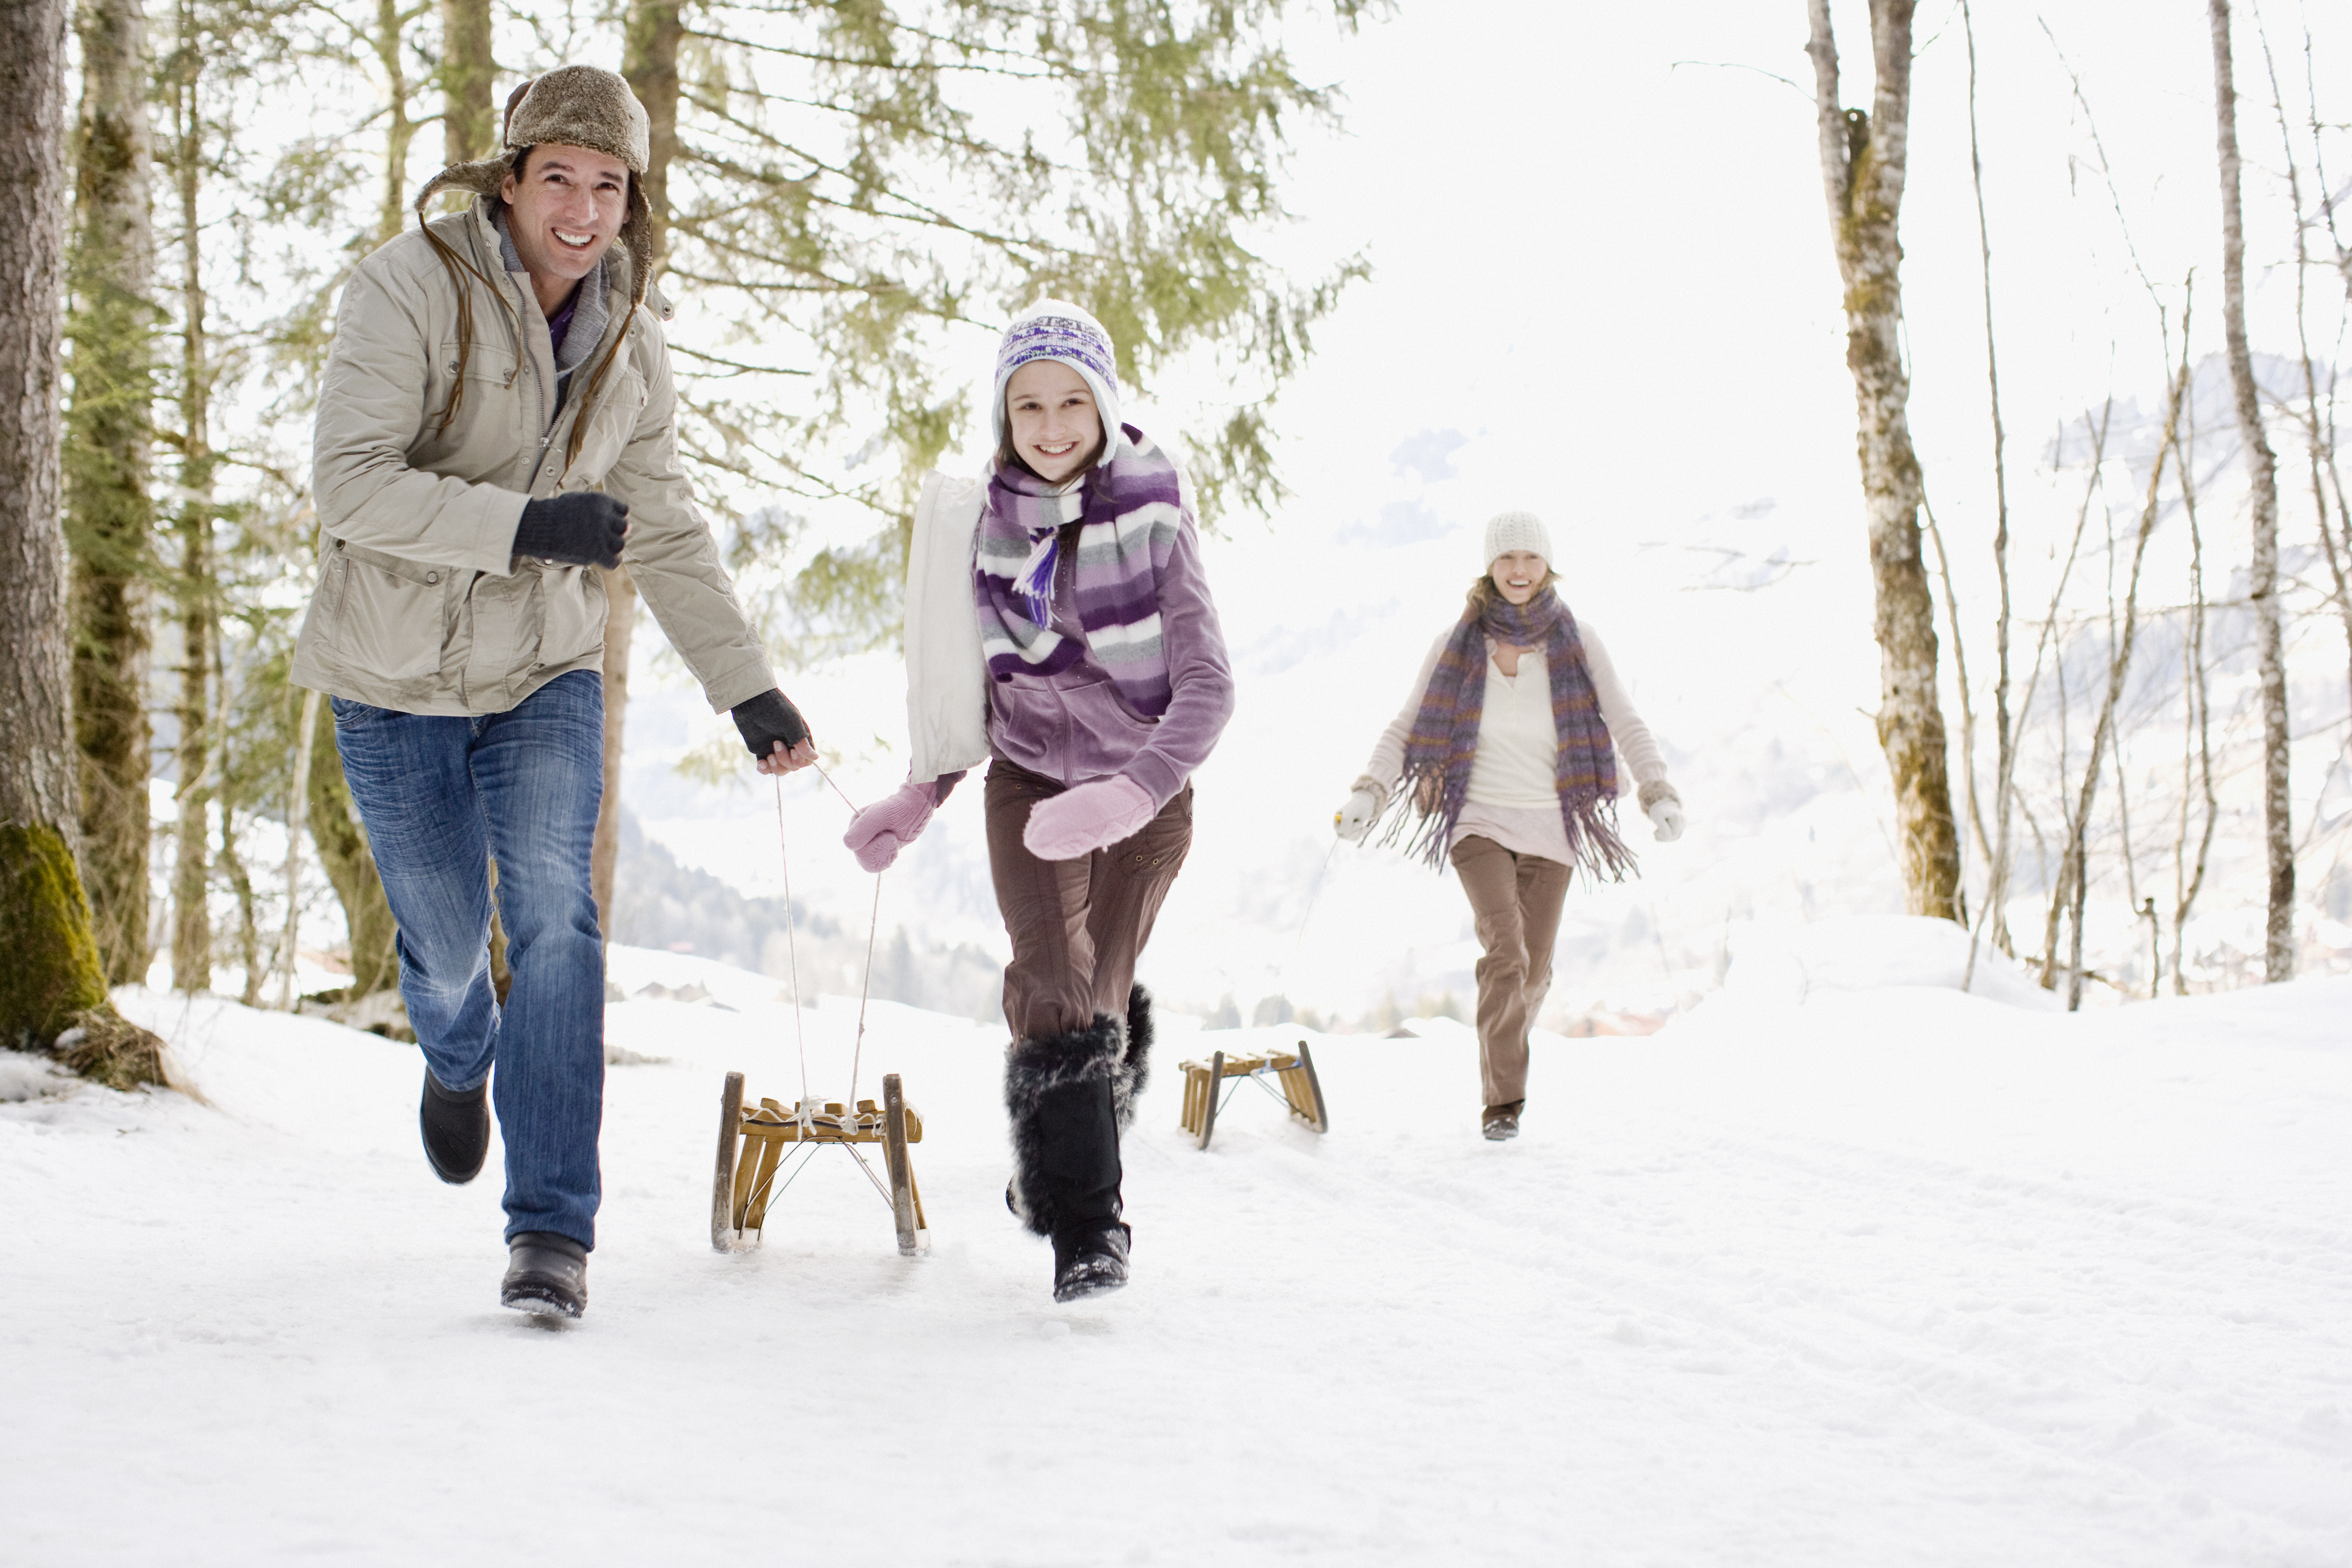 Family pulling sleds through snow | Source: Getty Images